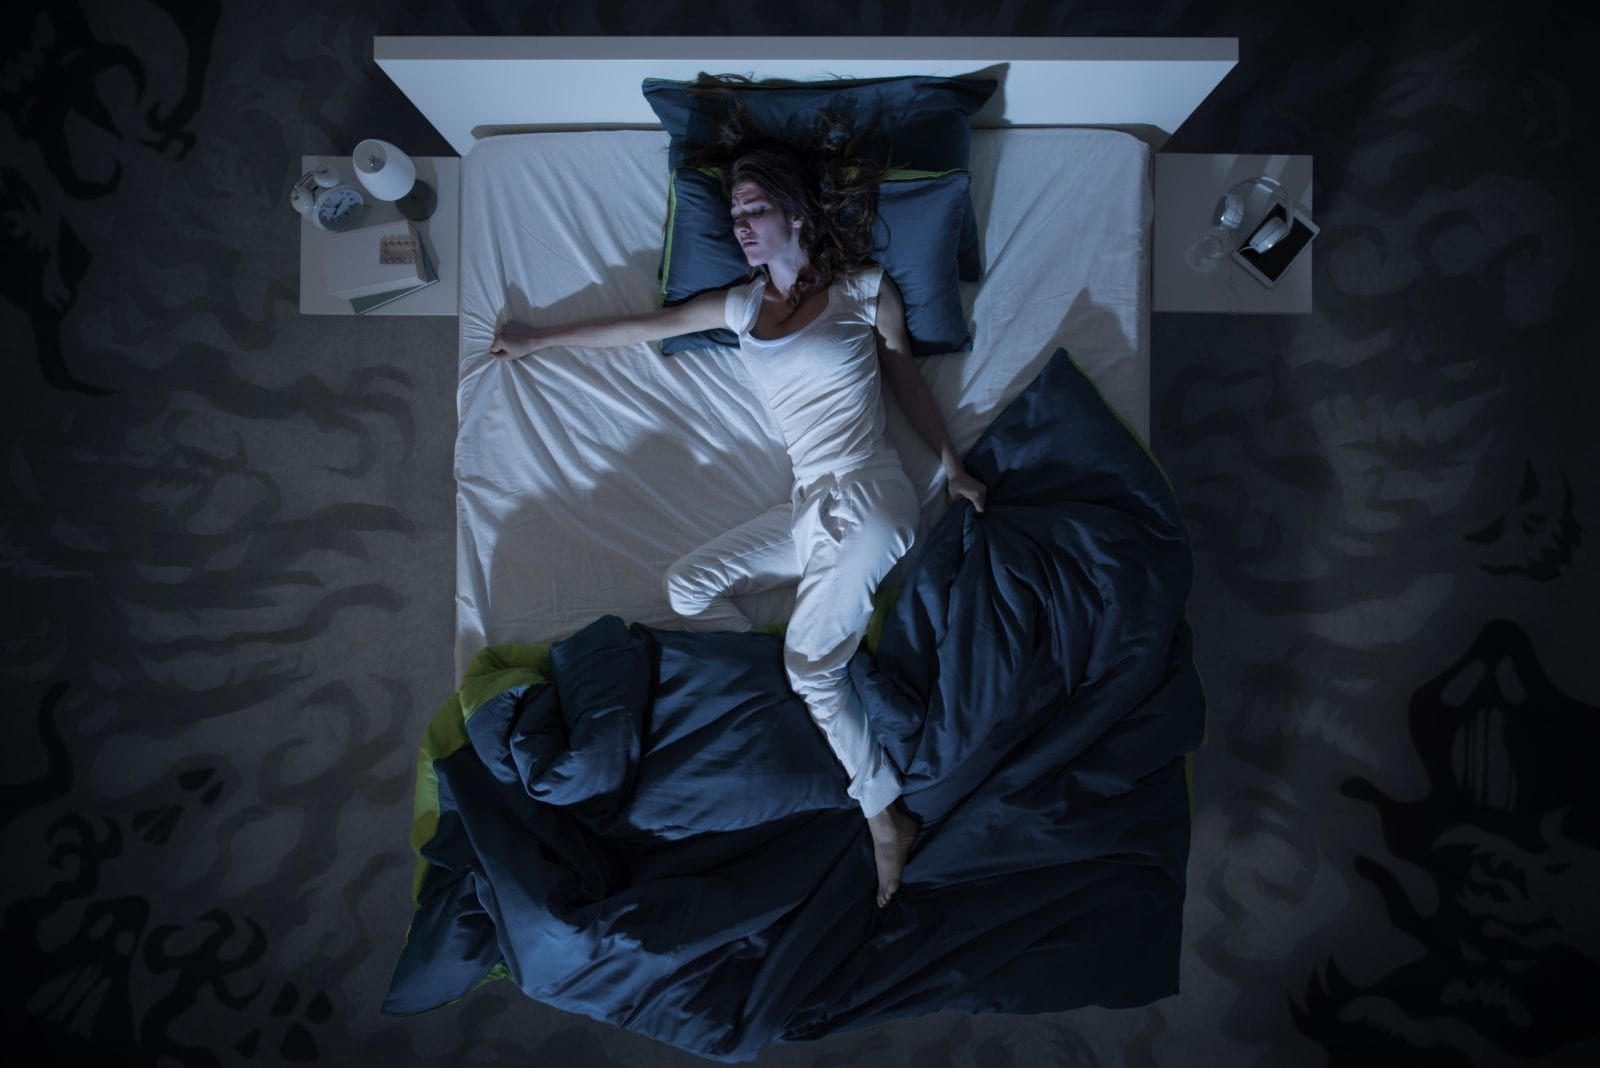 woman with sleeping problems